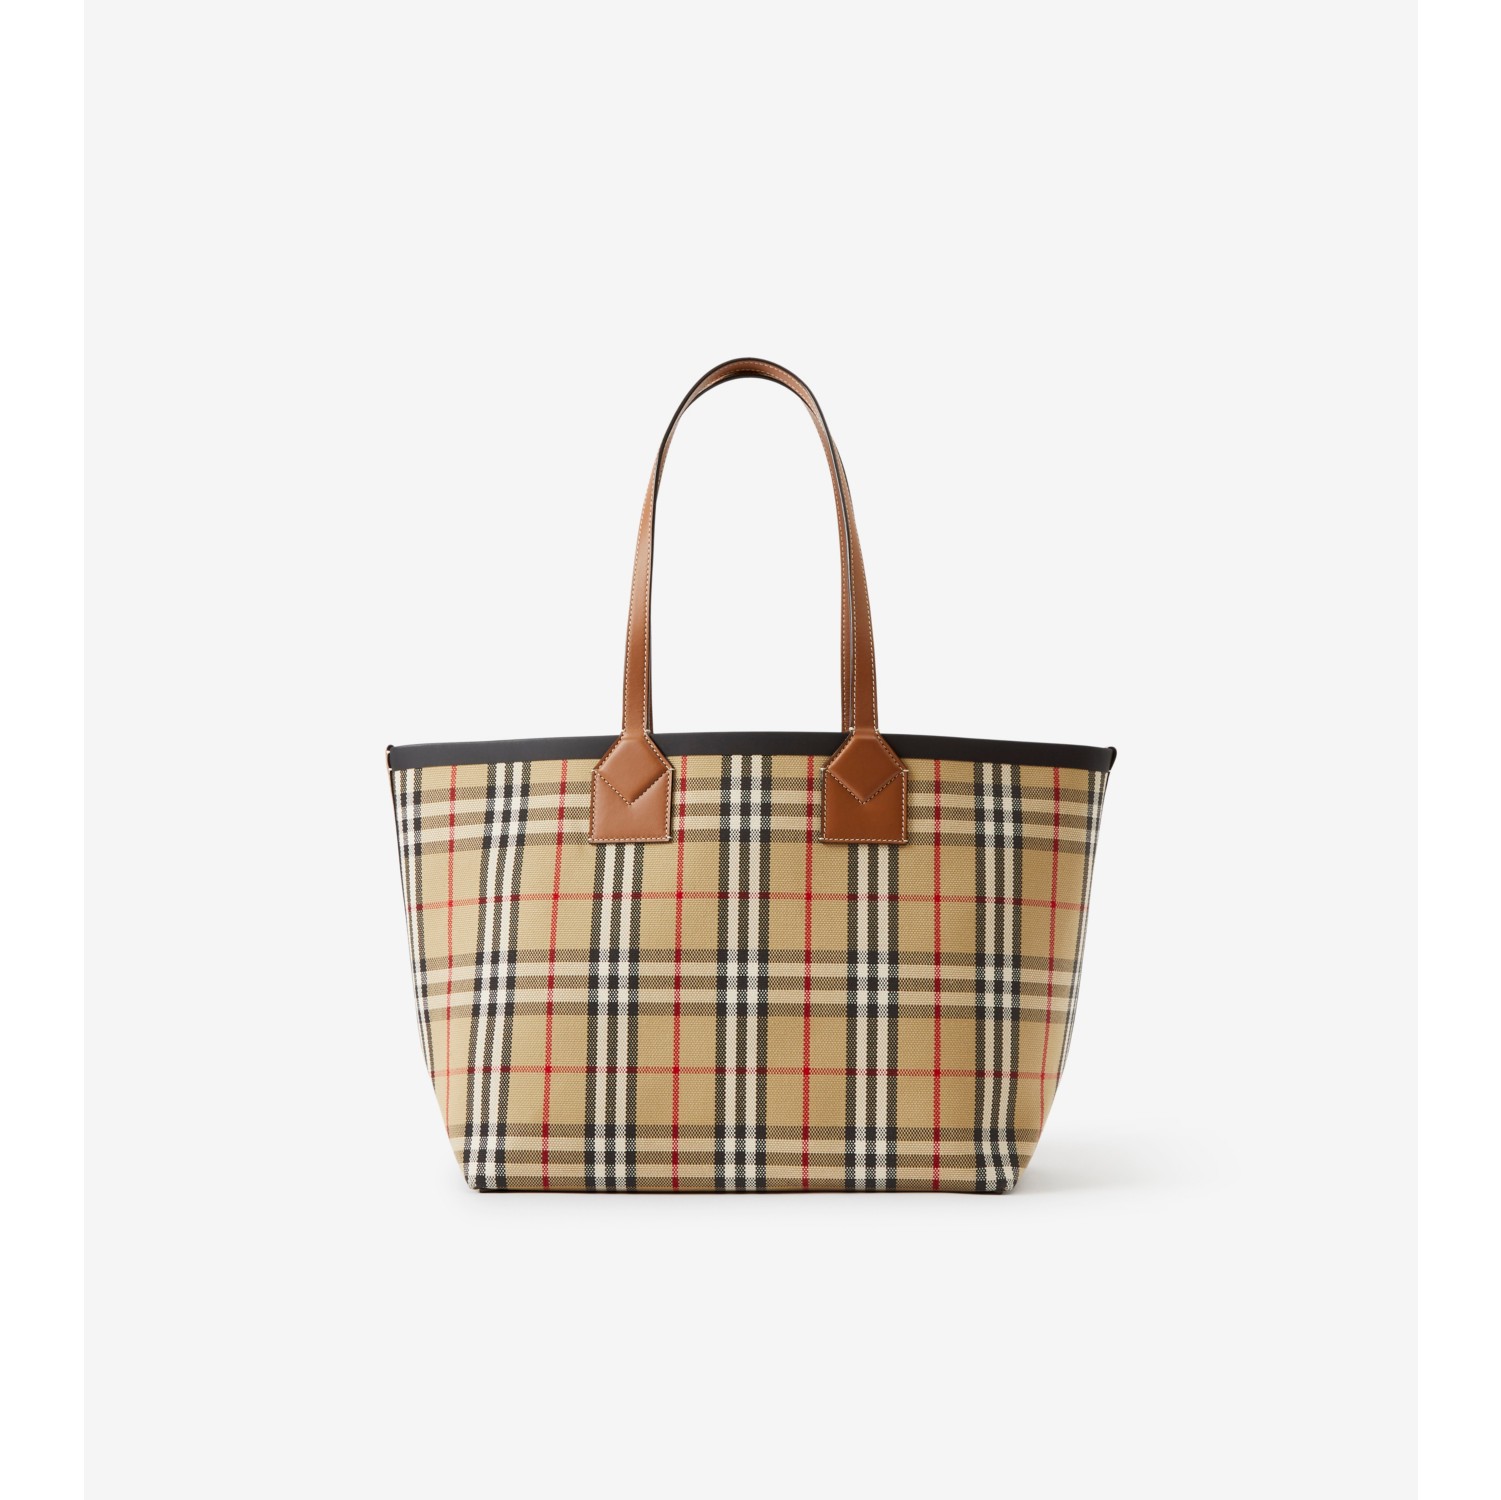 Medium London Tote in Briar brown/black - Women, Vintage Check | Burberry®  Official